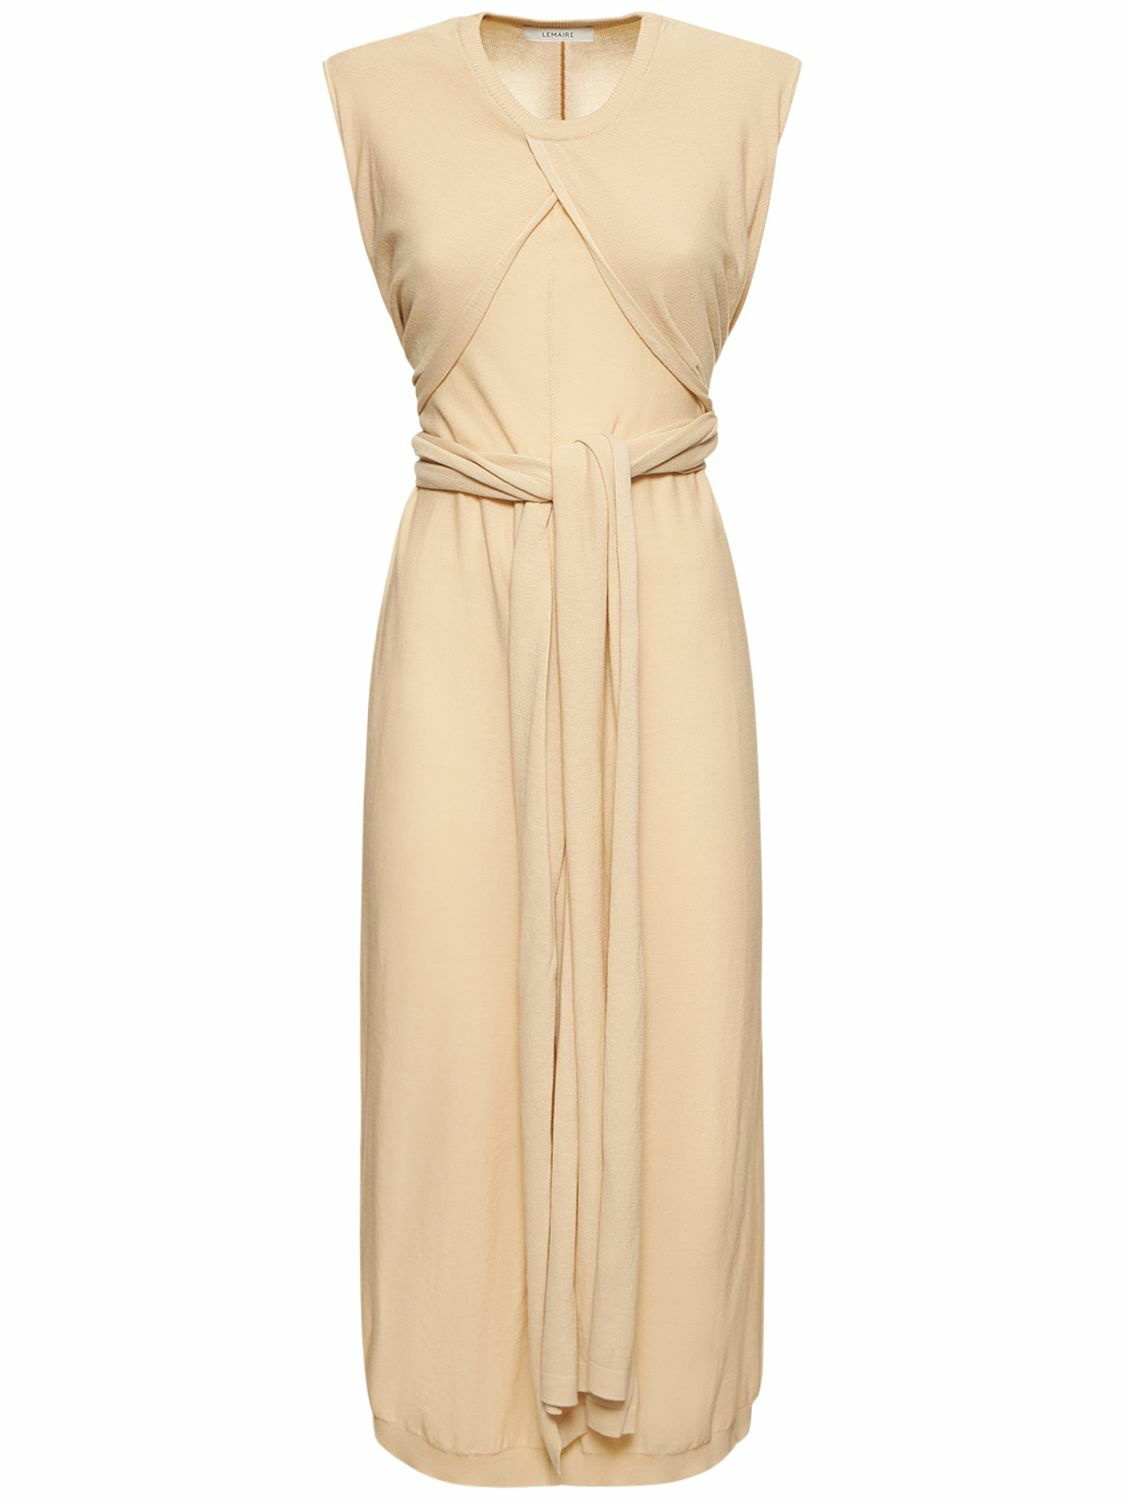 LEMAIRE - Sleeveless Knotted Cotton Midi Dress Lemaire